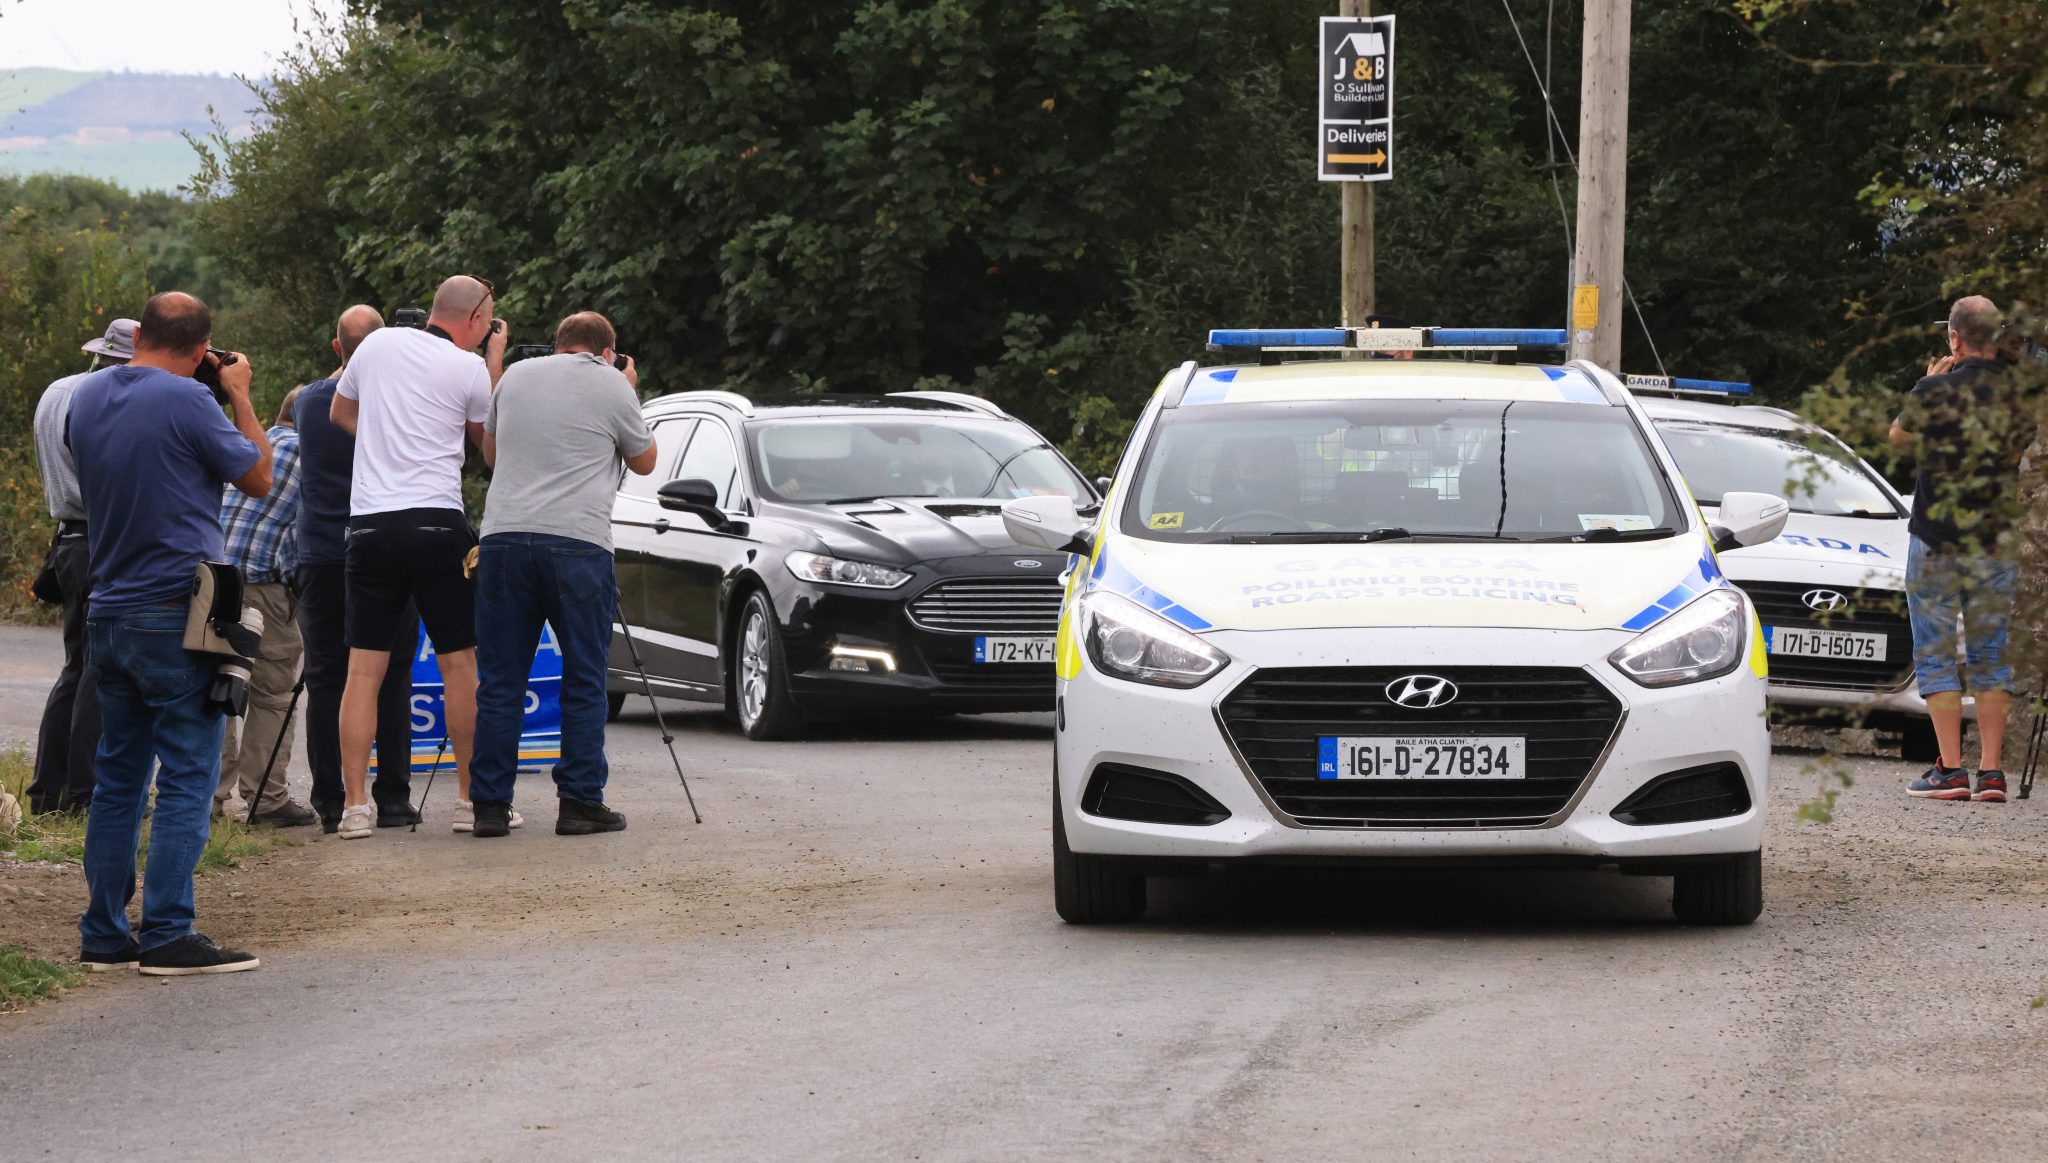 Garda cars escort cars carrying the bodies of three people past waiting media and away from the scene on the approach road to Ballyreehan, Lixnaw in Co Kerry.